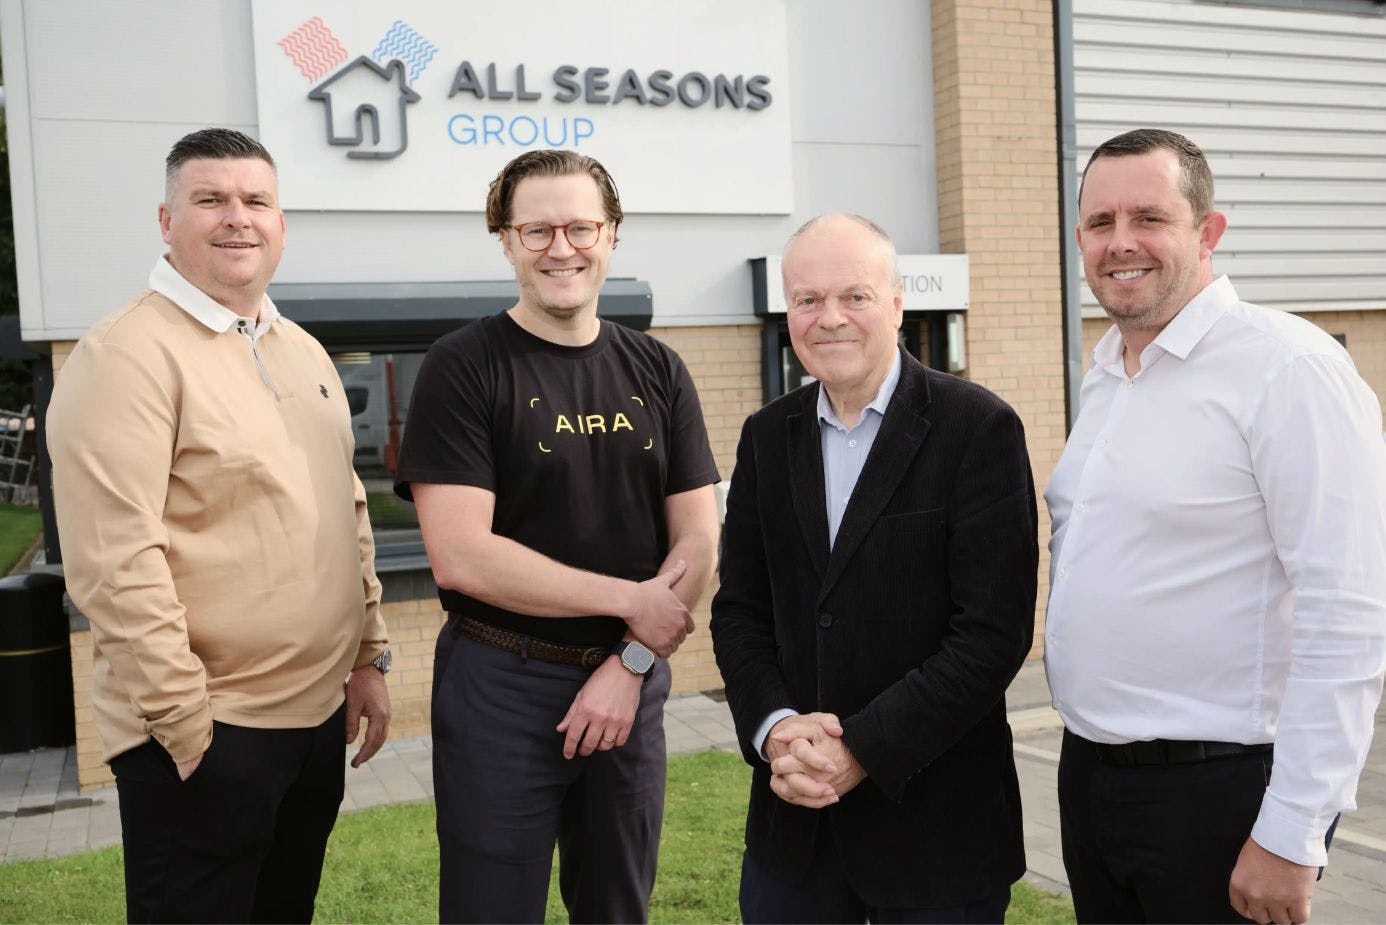 Aira UK CEO Daniel Särefjord with All Seasons Energy Directors Kevin Oldfield and Richard Moule and Clive Betts, MP for Sheffield South East and chair of the Levelling Up, Housing and Communities Committee